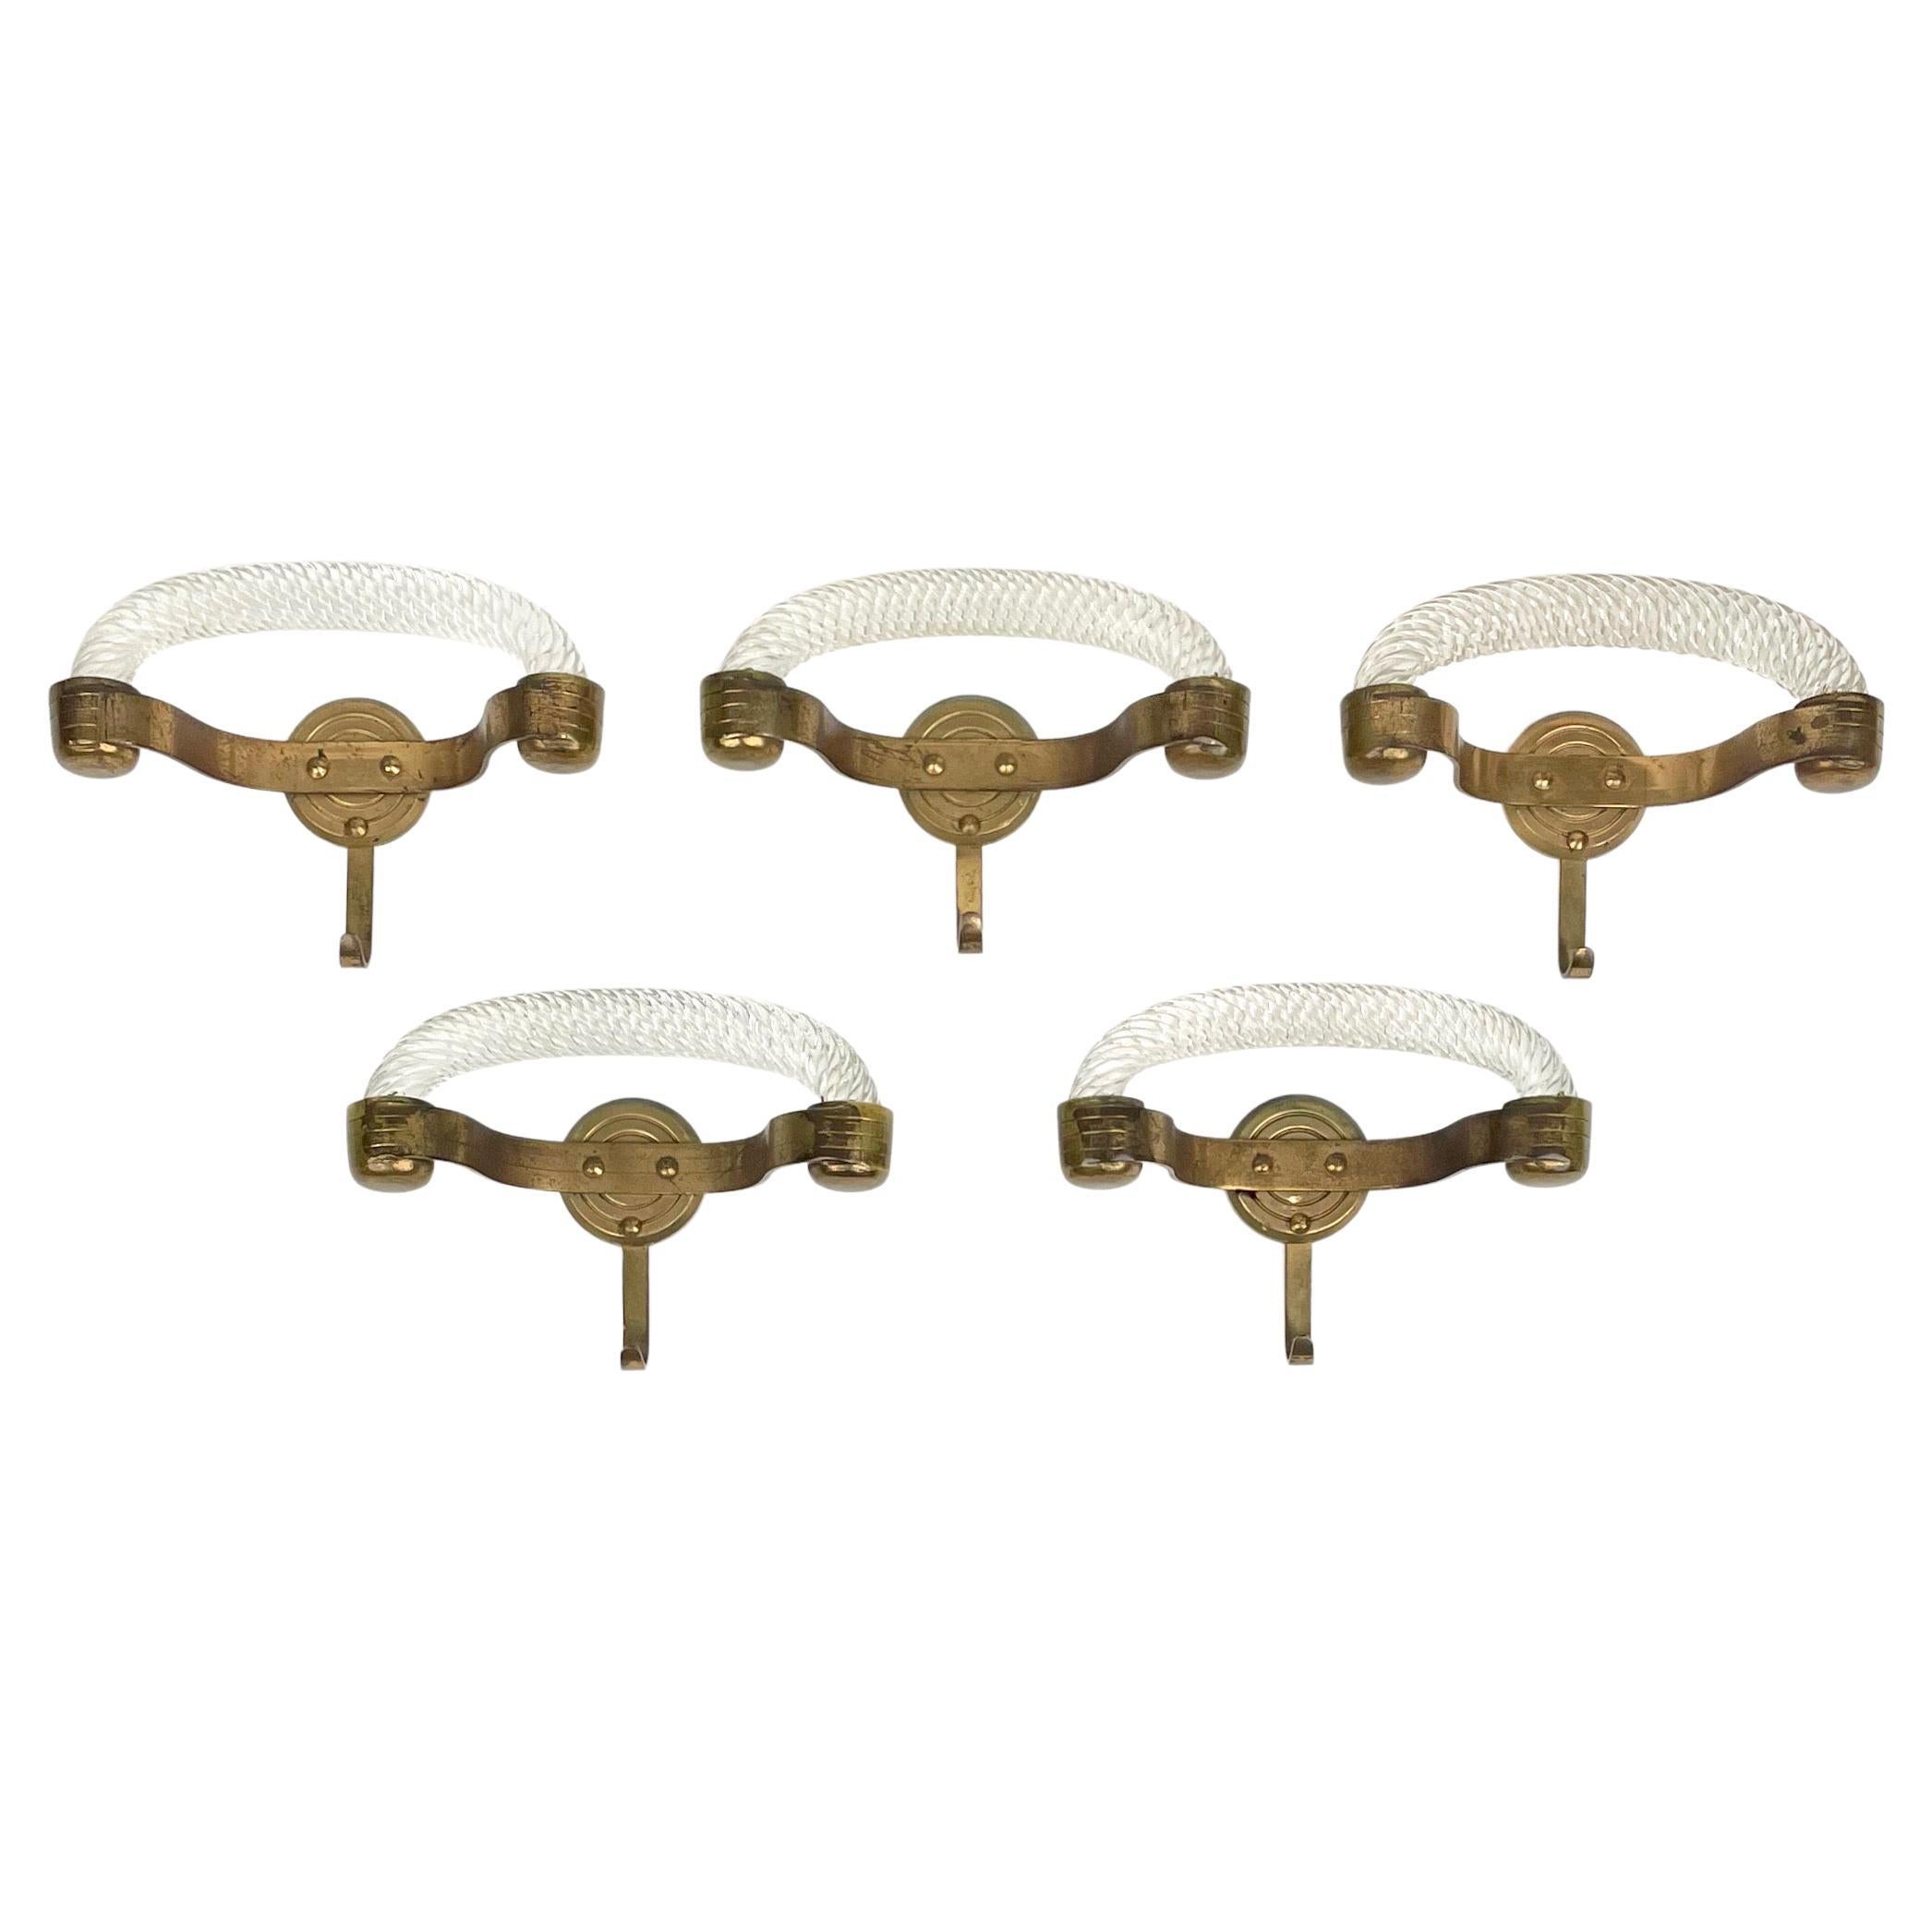 Set of Five Coat Hanger Rack in Murano Glass & Brass by Venini, Italy, 1940s For Sale